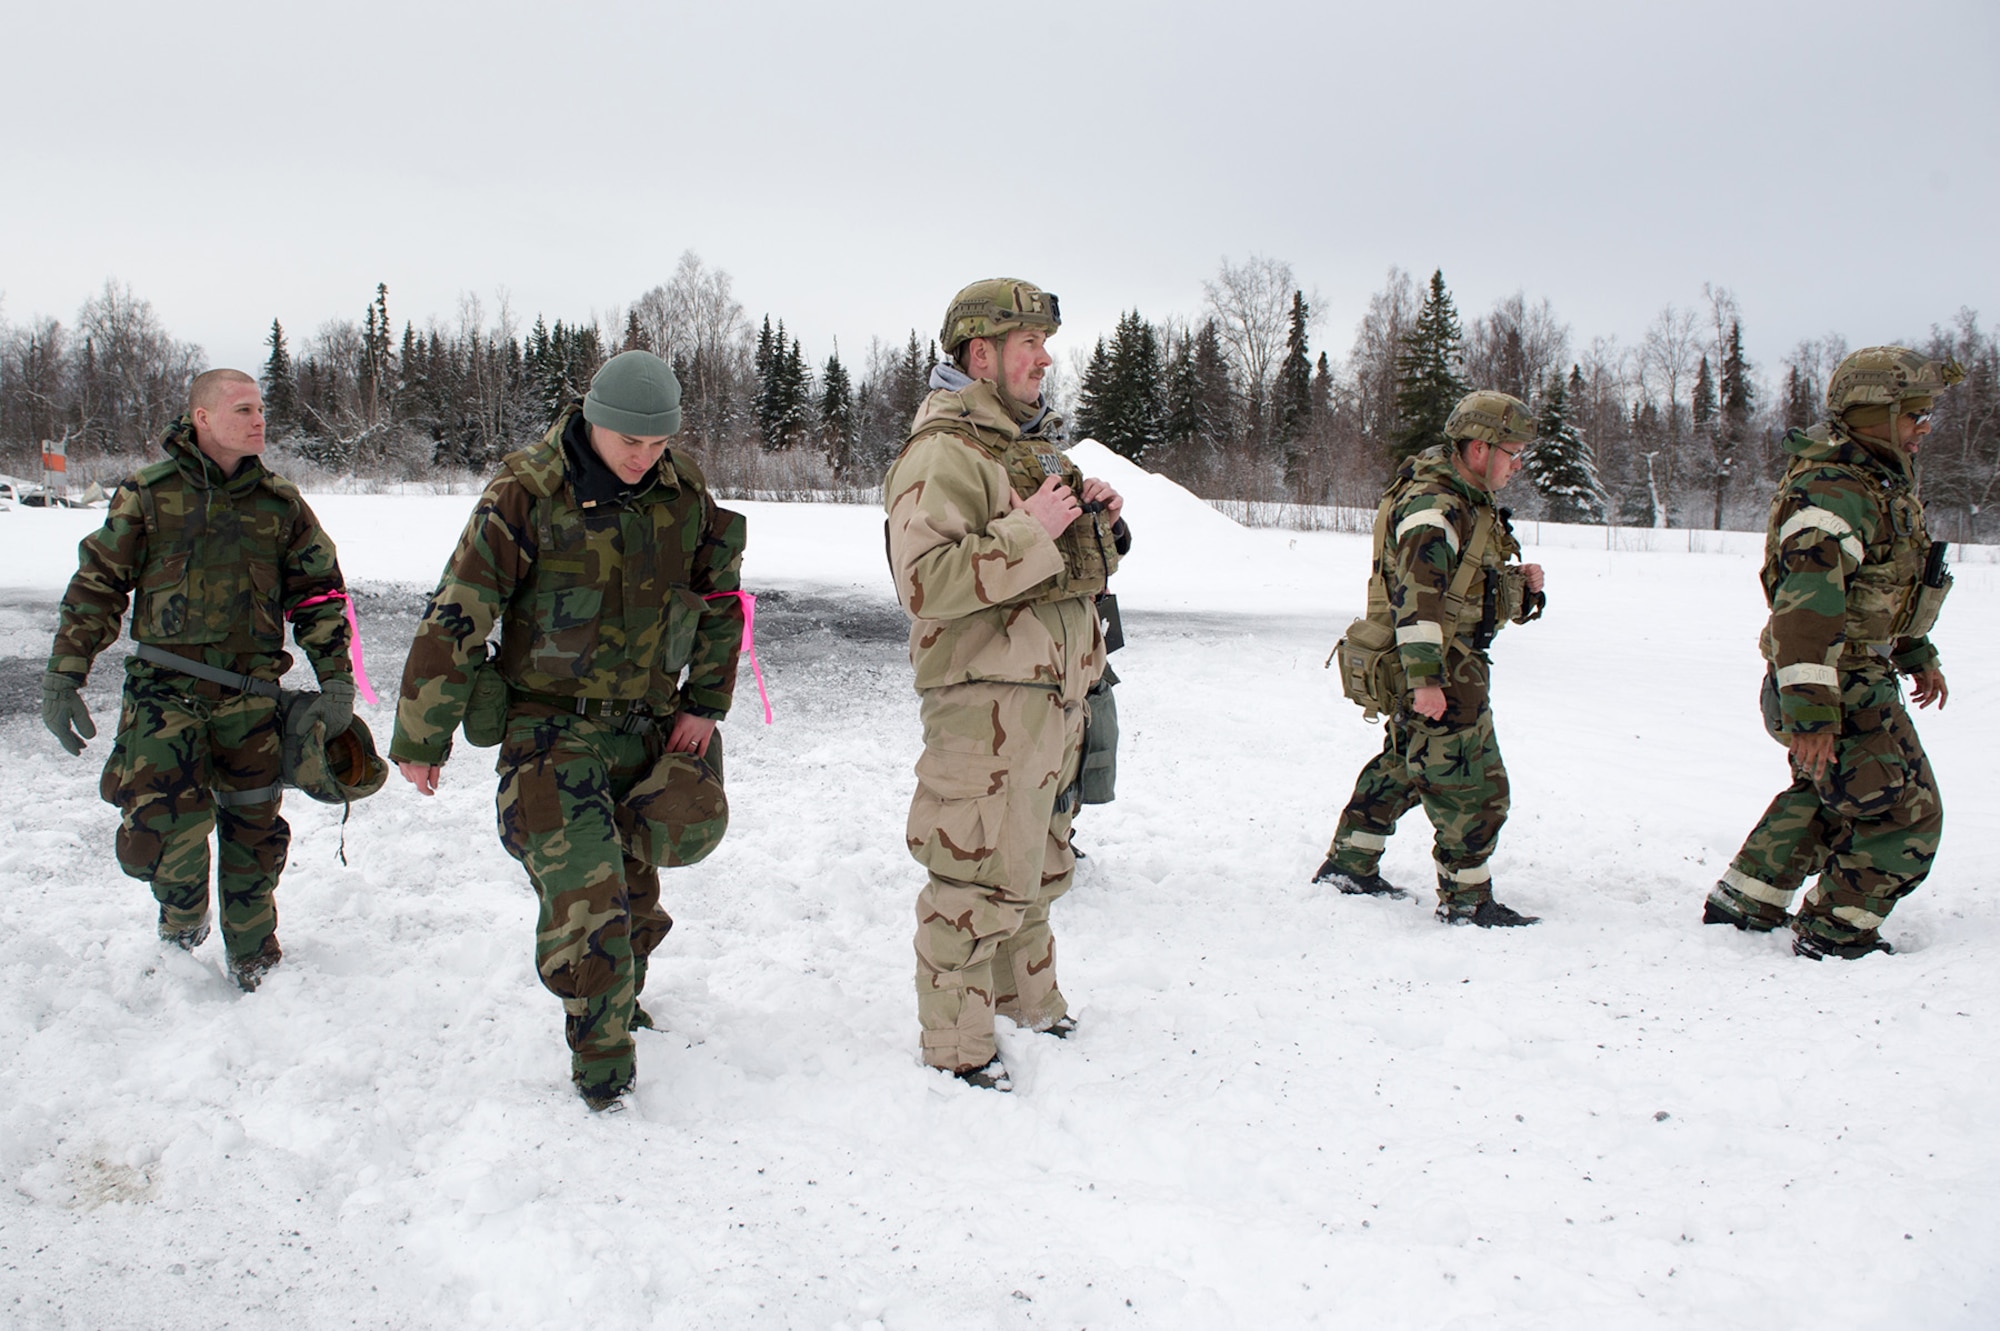 Air Force Staff Sgt. Zacheriah Sekula, center, assigned to the 673d Civil Engineer Squadron, Explosives Ordinance Disposal Flight, watches his fellow Airmen walk out away from a blast area after a live-fire demolitions exercise that was conducted in Mission Oriented Protective Posture 4 on Joint Base Elmendorf-Richardson, Alaska, Feb.14, 2018.  The Airmen were conducting EOD training in a simulated chemical weapons contaminated environment.